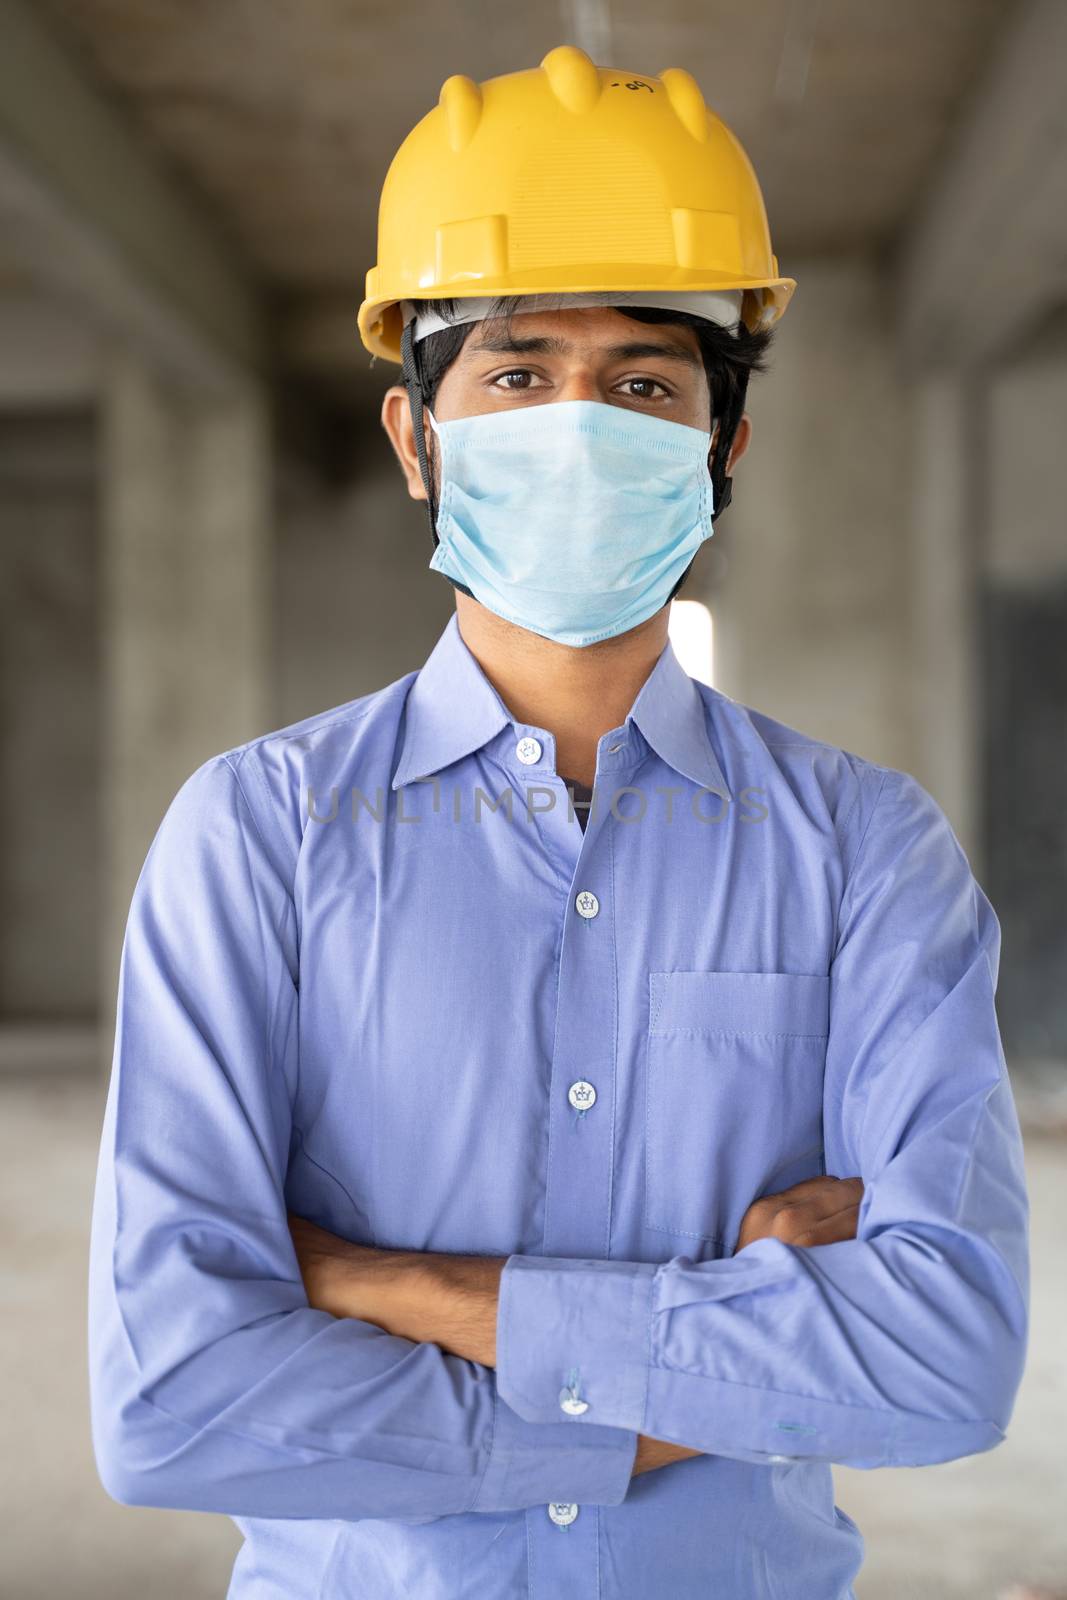 Concept of back to work, opening of construction sites - portrait of confident male construction worker in a construction helmet with medical mask due to coronavirus or covid-19 pandemic. by lakshmiprasad.maski@gmai.com